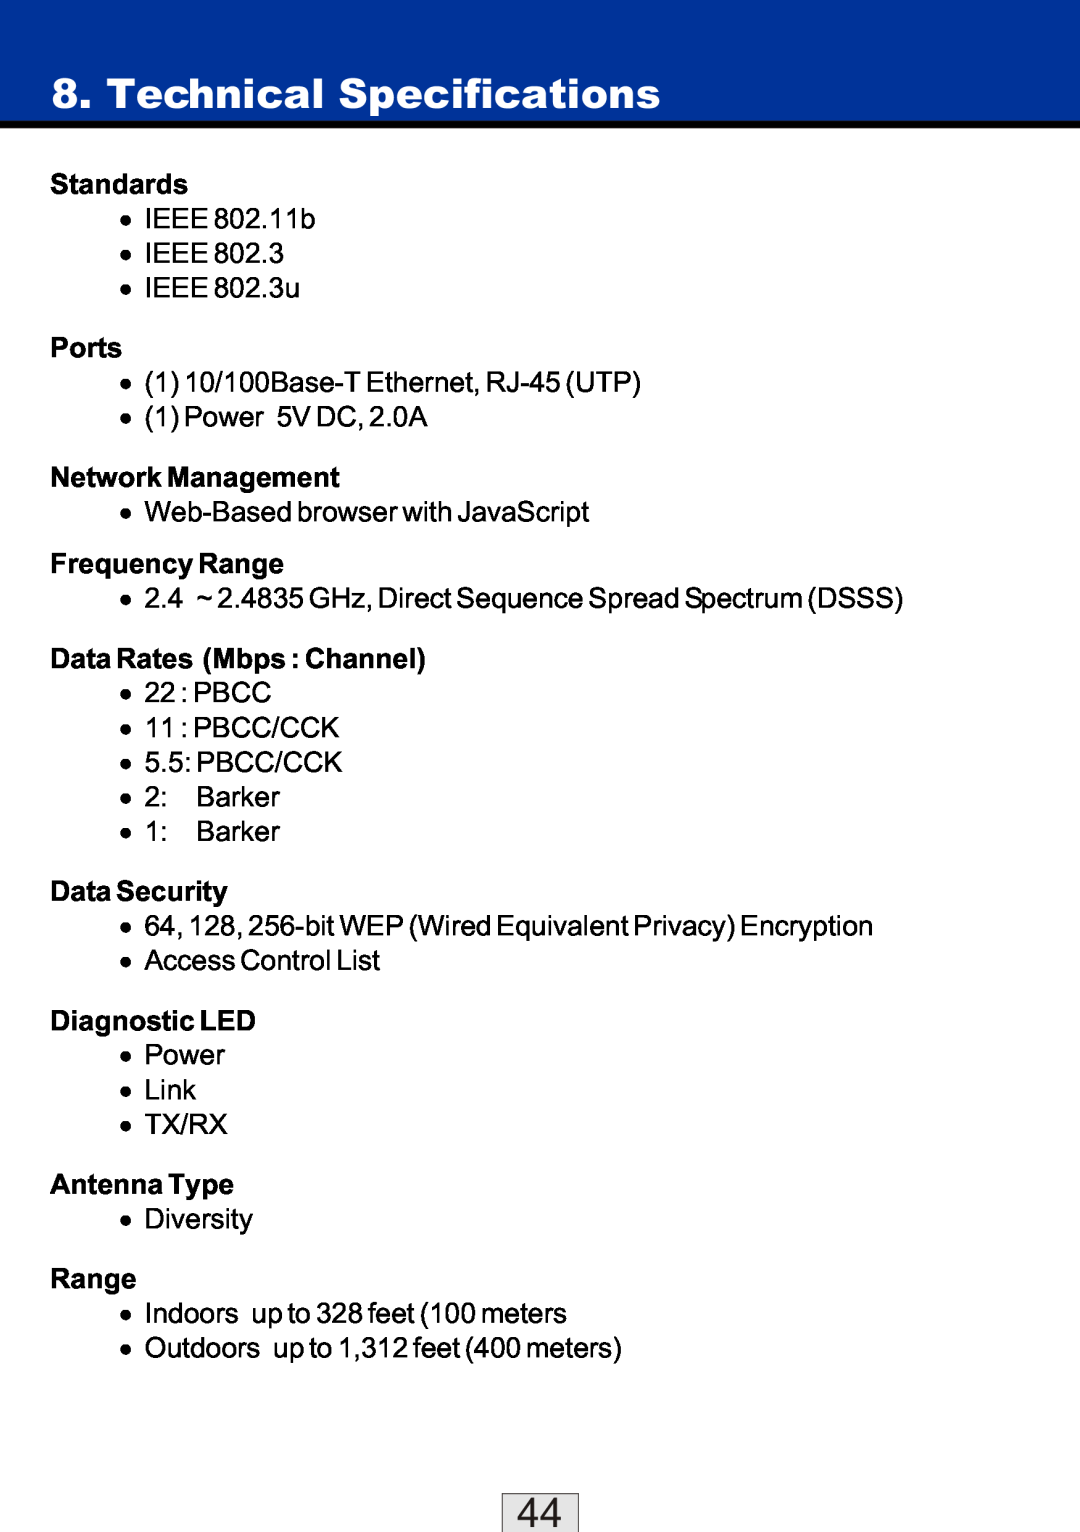 TRENDnet TEW-310APBX manual Technical Specifications, Standards, Ports, Network Management, Frequency Range, Data Security 